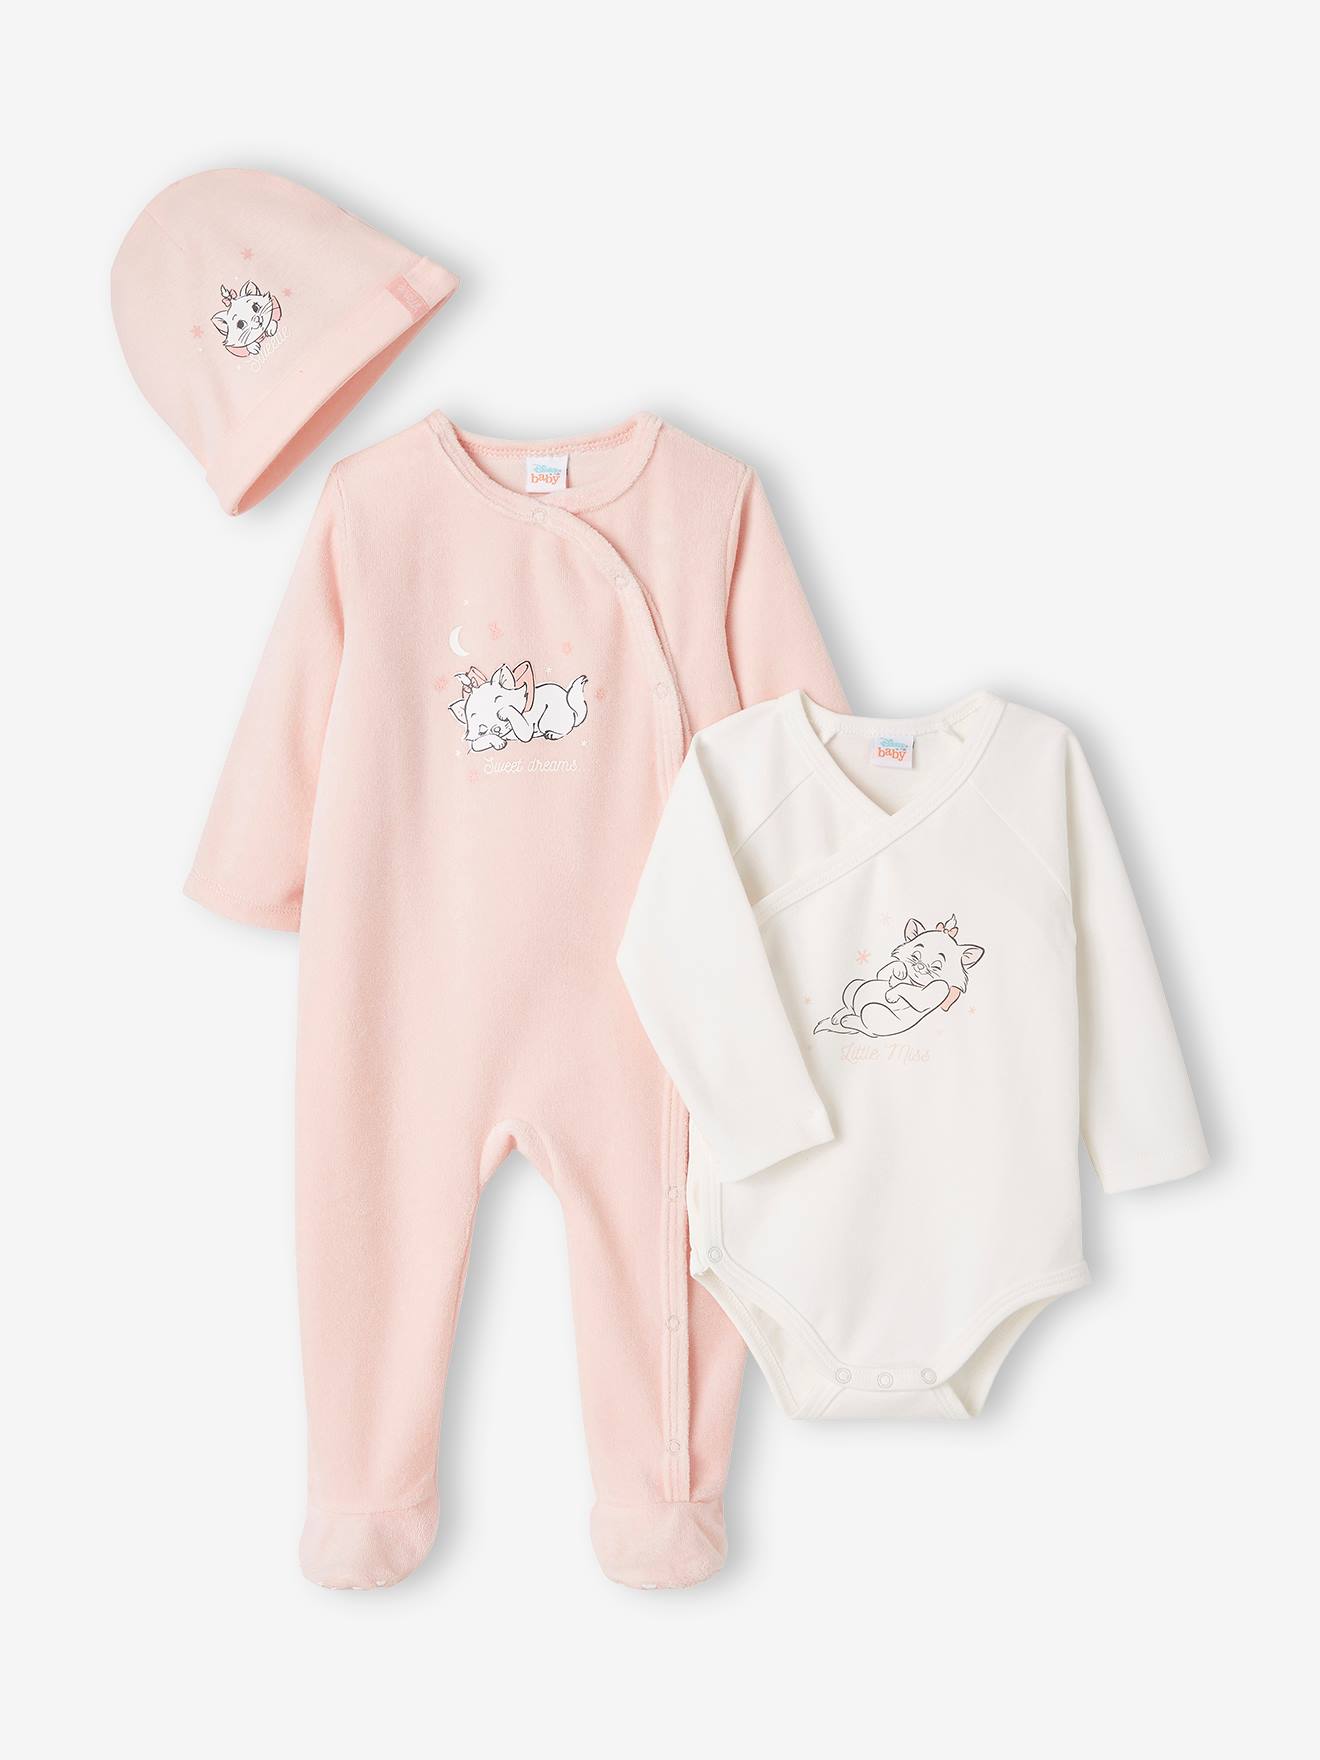 1-3 Months Mothercare 3  MOTHERCARE Bunny Sleepsuits Babygrow New Born 